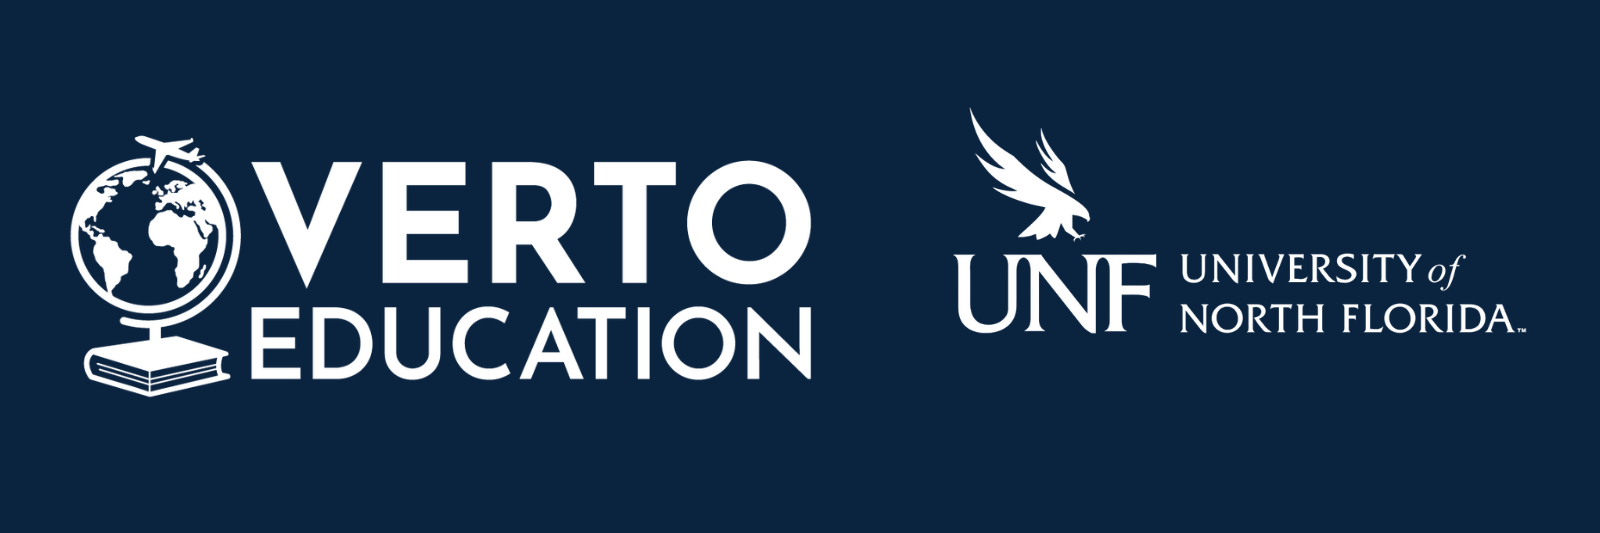 Verto Education and the University of North Florida logos on a blue background